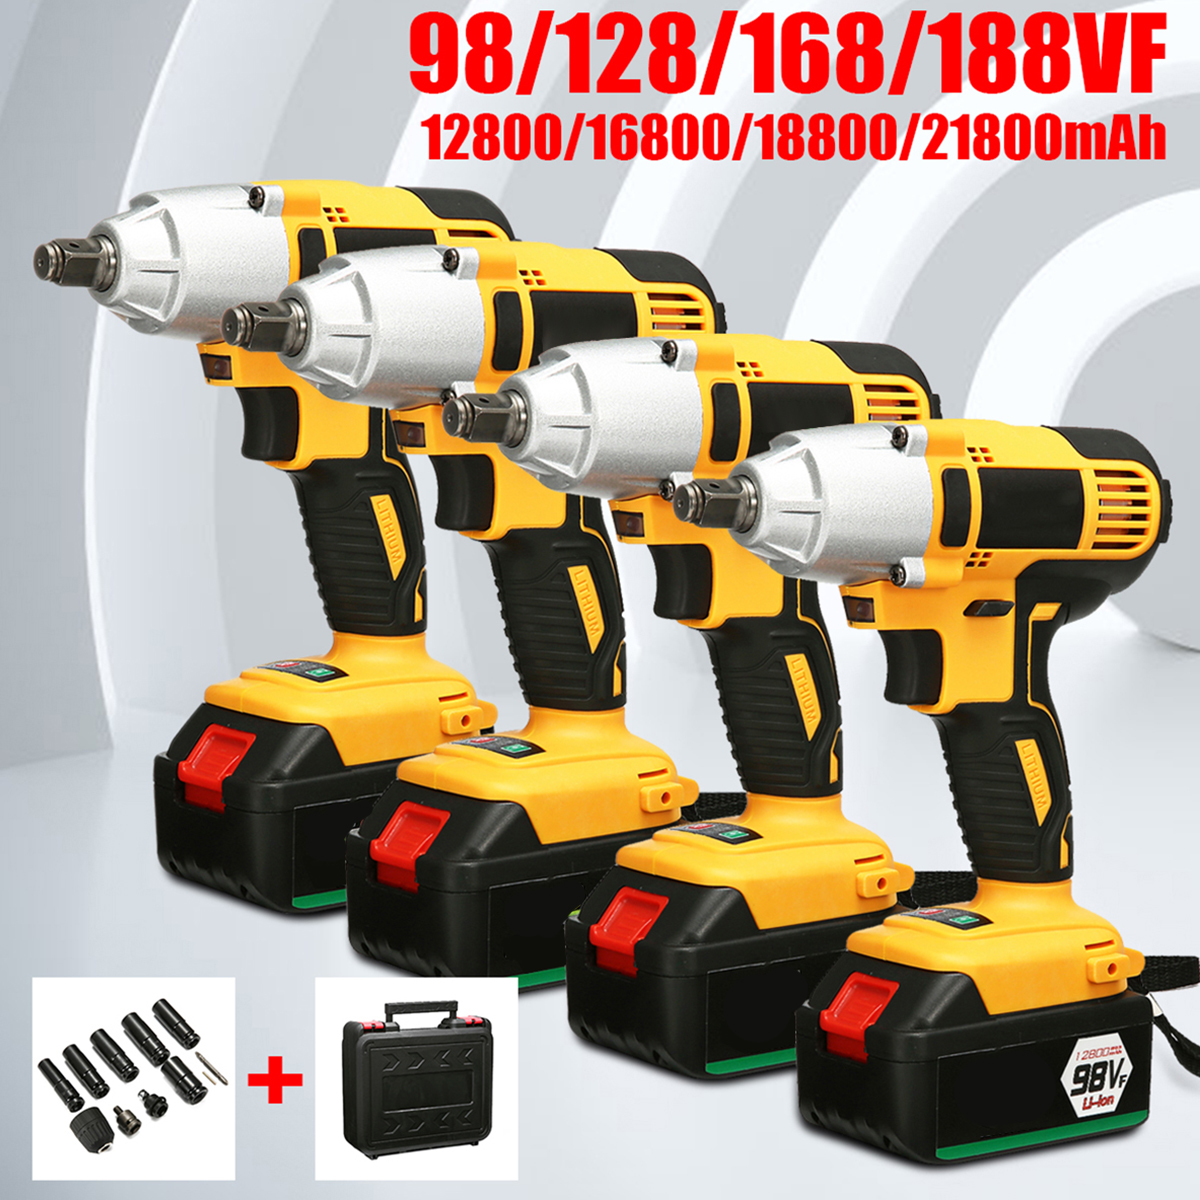 220V-98128168VF-Electric-Cordless-Impact-Wrench-Drill-LED-Battery-Sockets-1747411-2